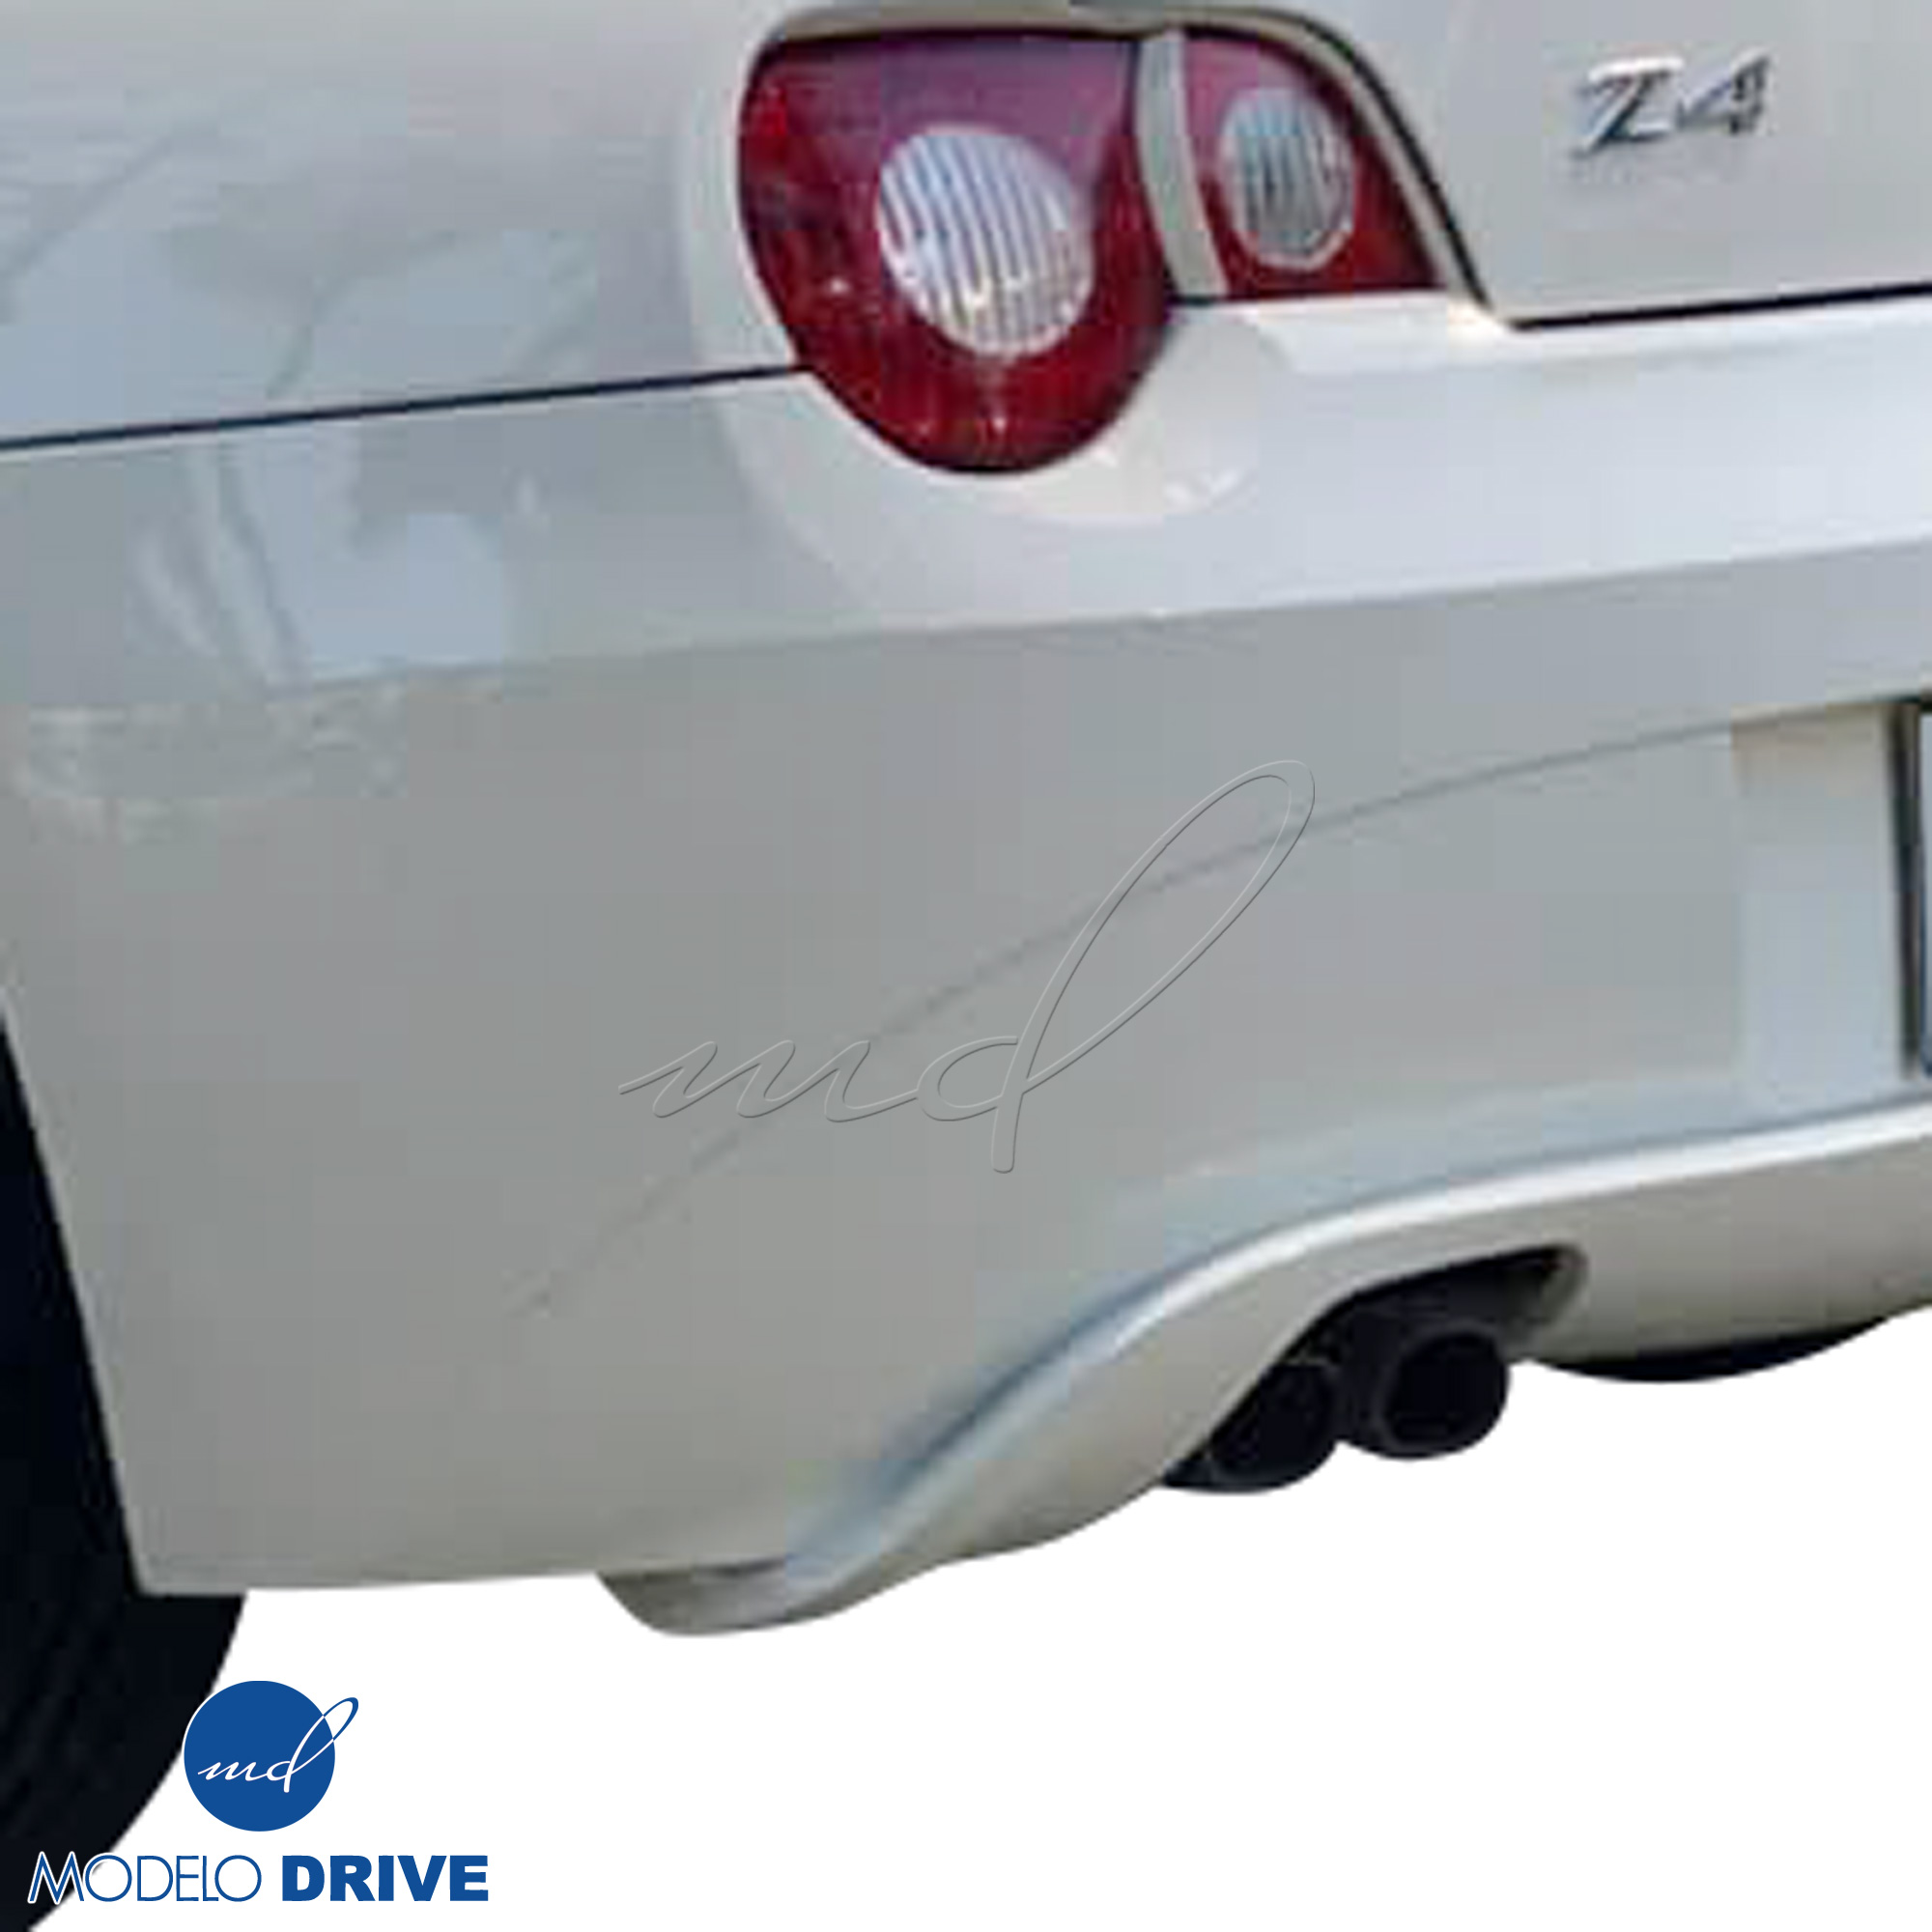 ModeloDrive FRP AERO Diffuser (dual exhst cut outs) > BMW Z4 E85 2003-2005 - Image 3